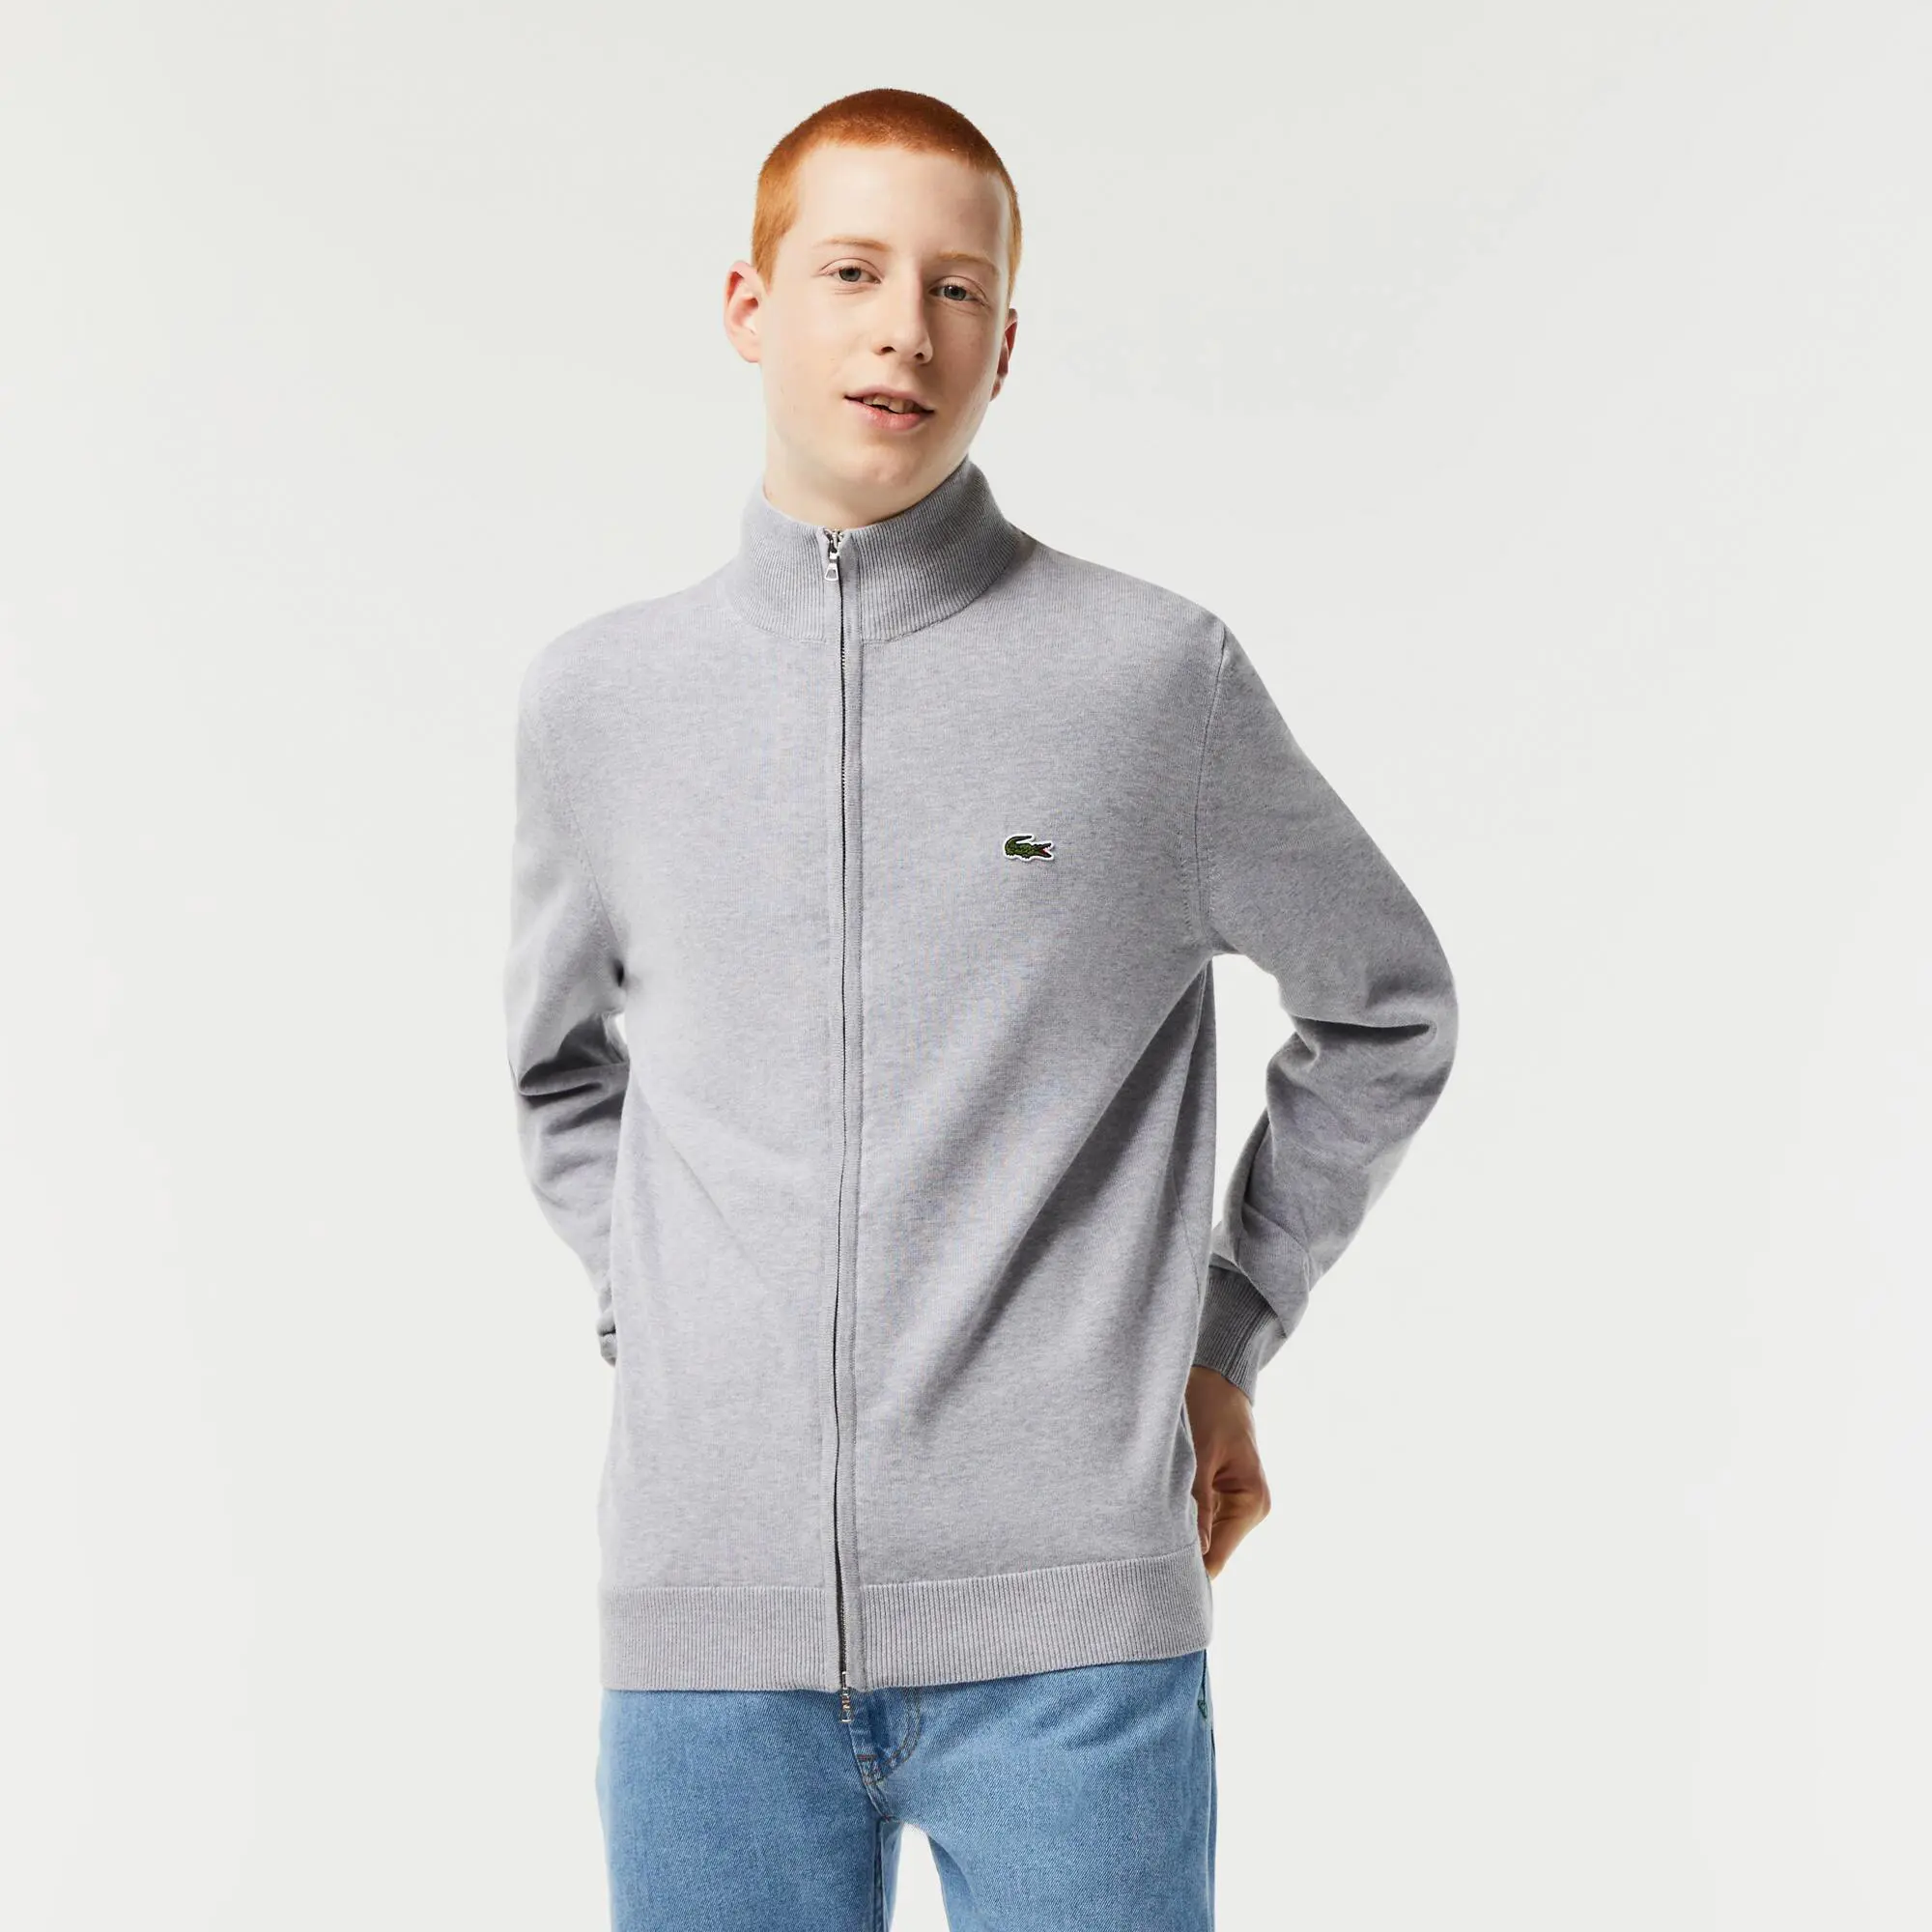 Lacoste Men's Stand-up Collar Organic Cotton Zippered Sweater. 1